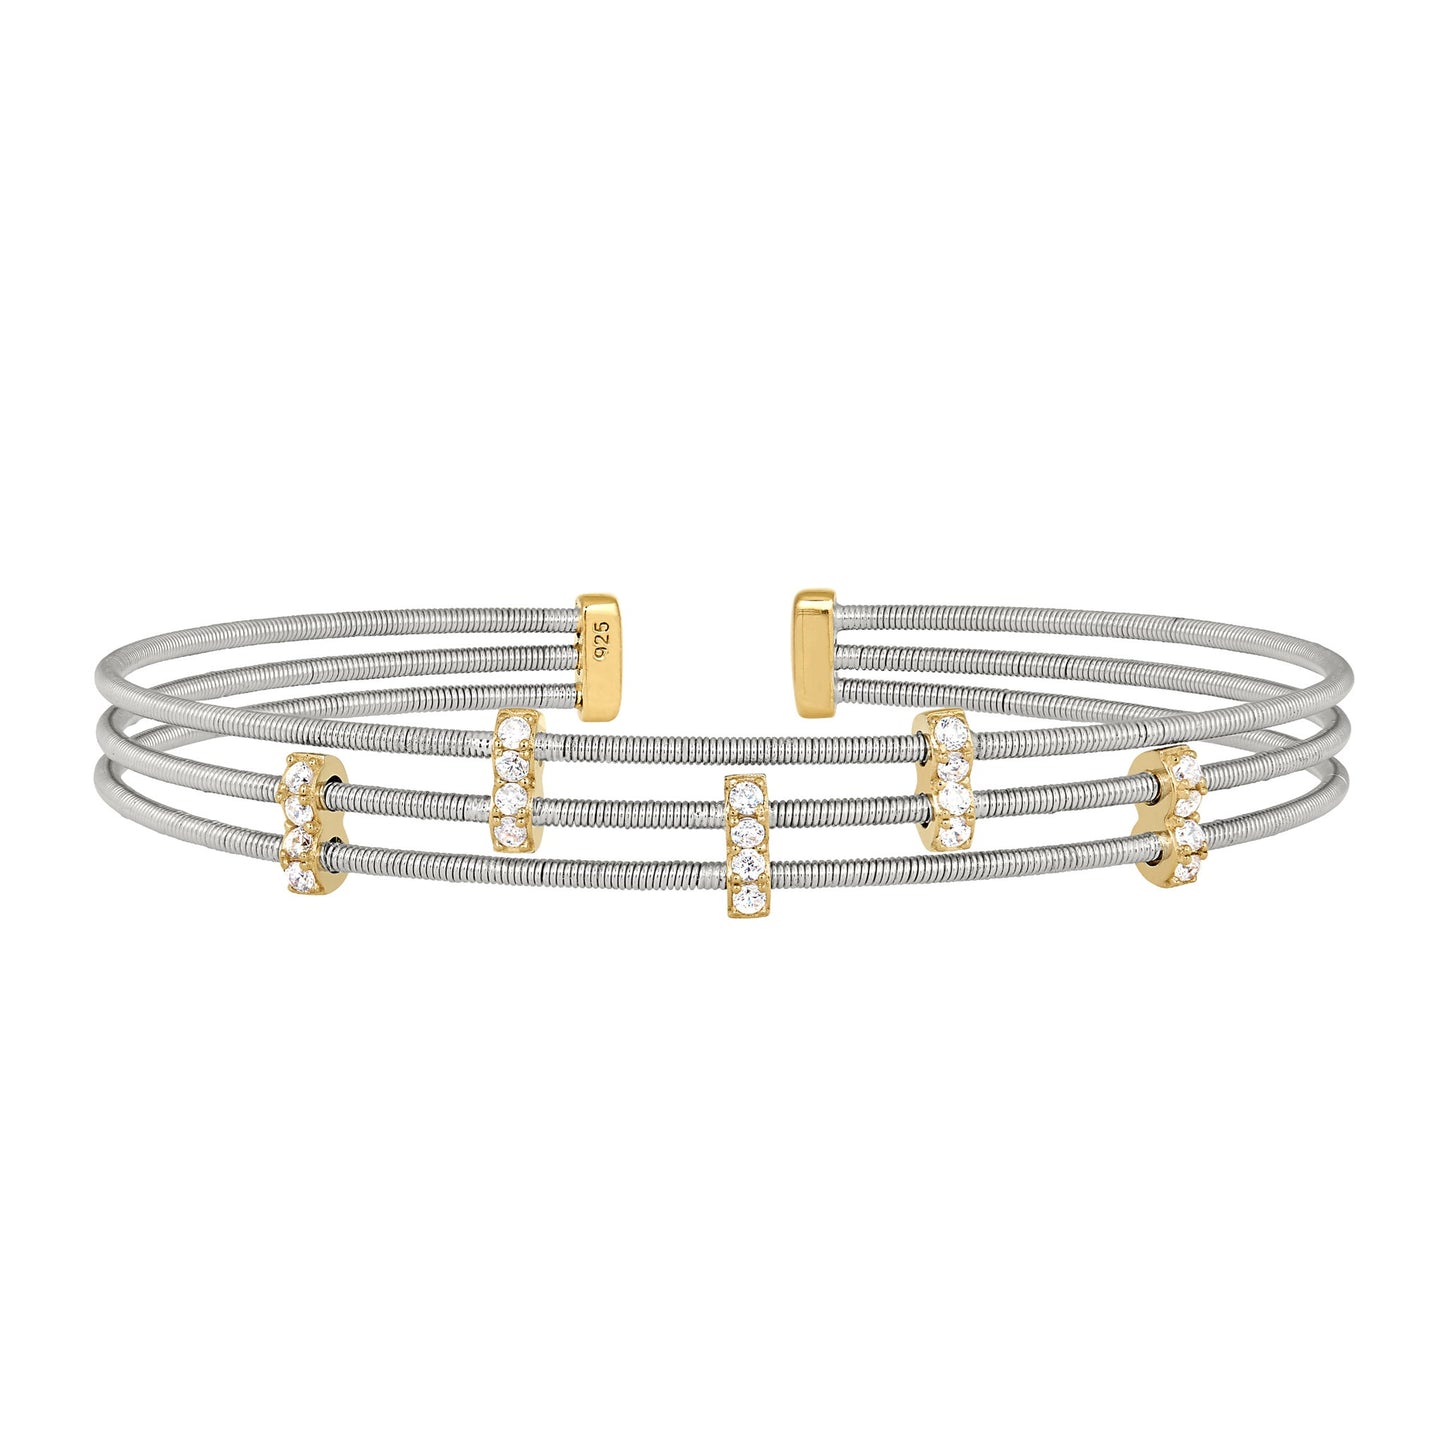 A three cable bracelet with simulated diamond five small vertical bars displayed on a neutral white background.